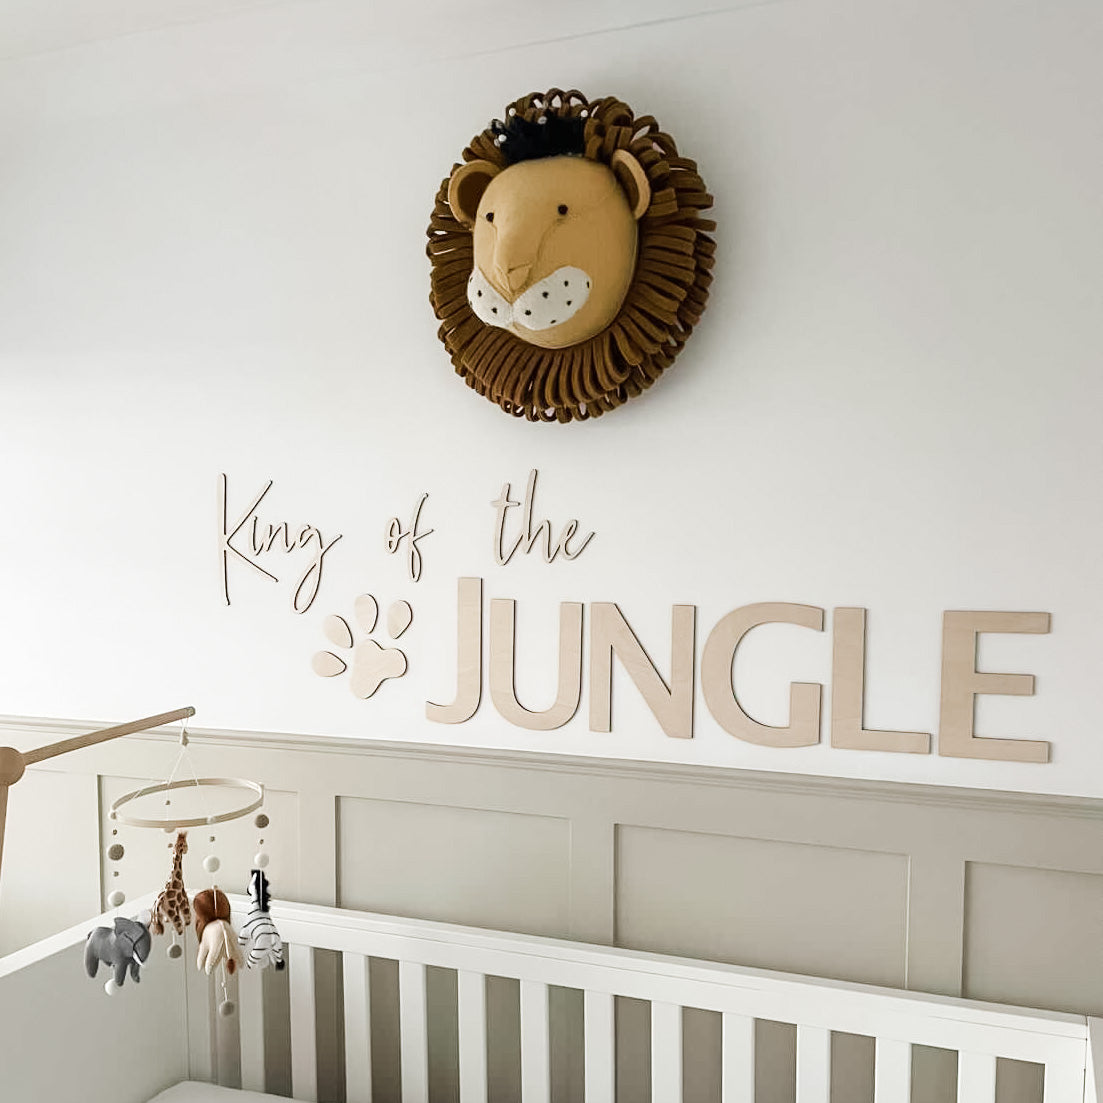 King of the JUNGLE Wall Lettering - Fox & Bramble, Fox + Bramble, Fox & Bramble